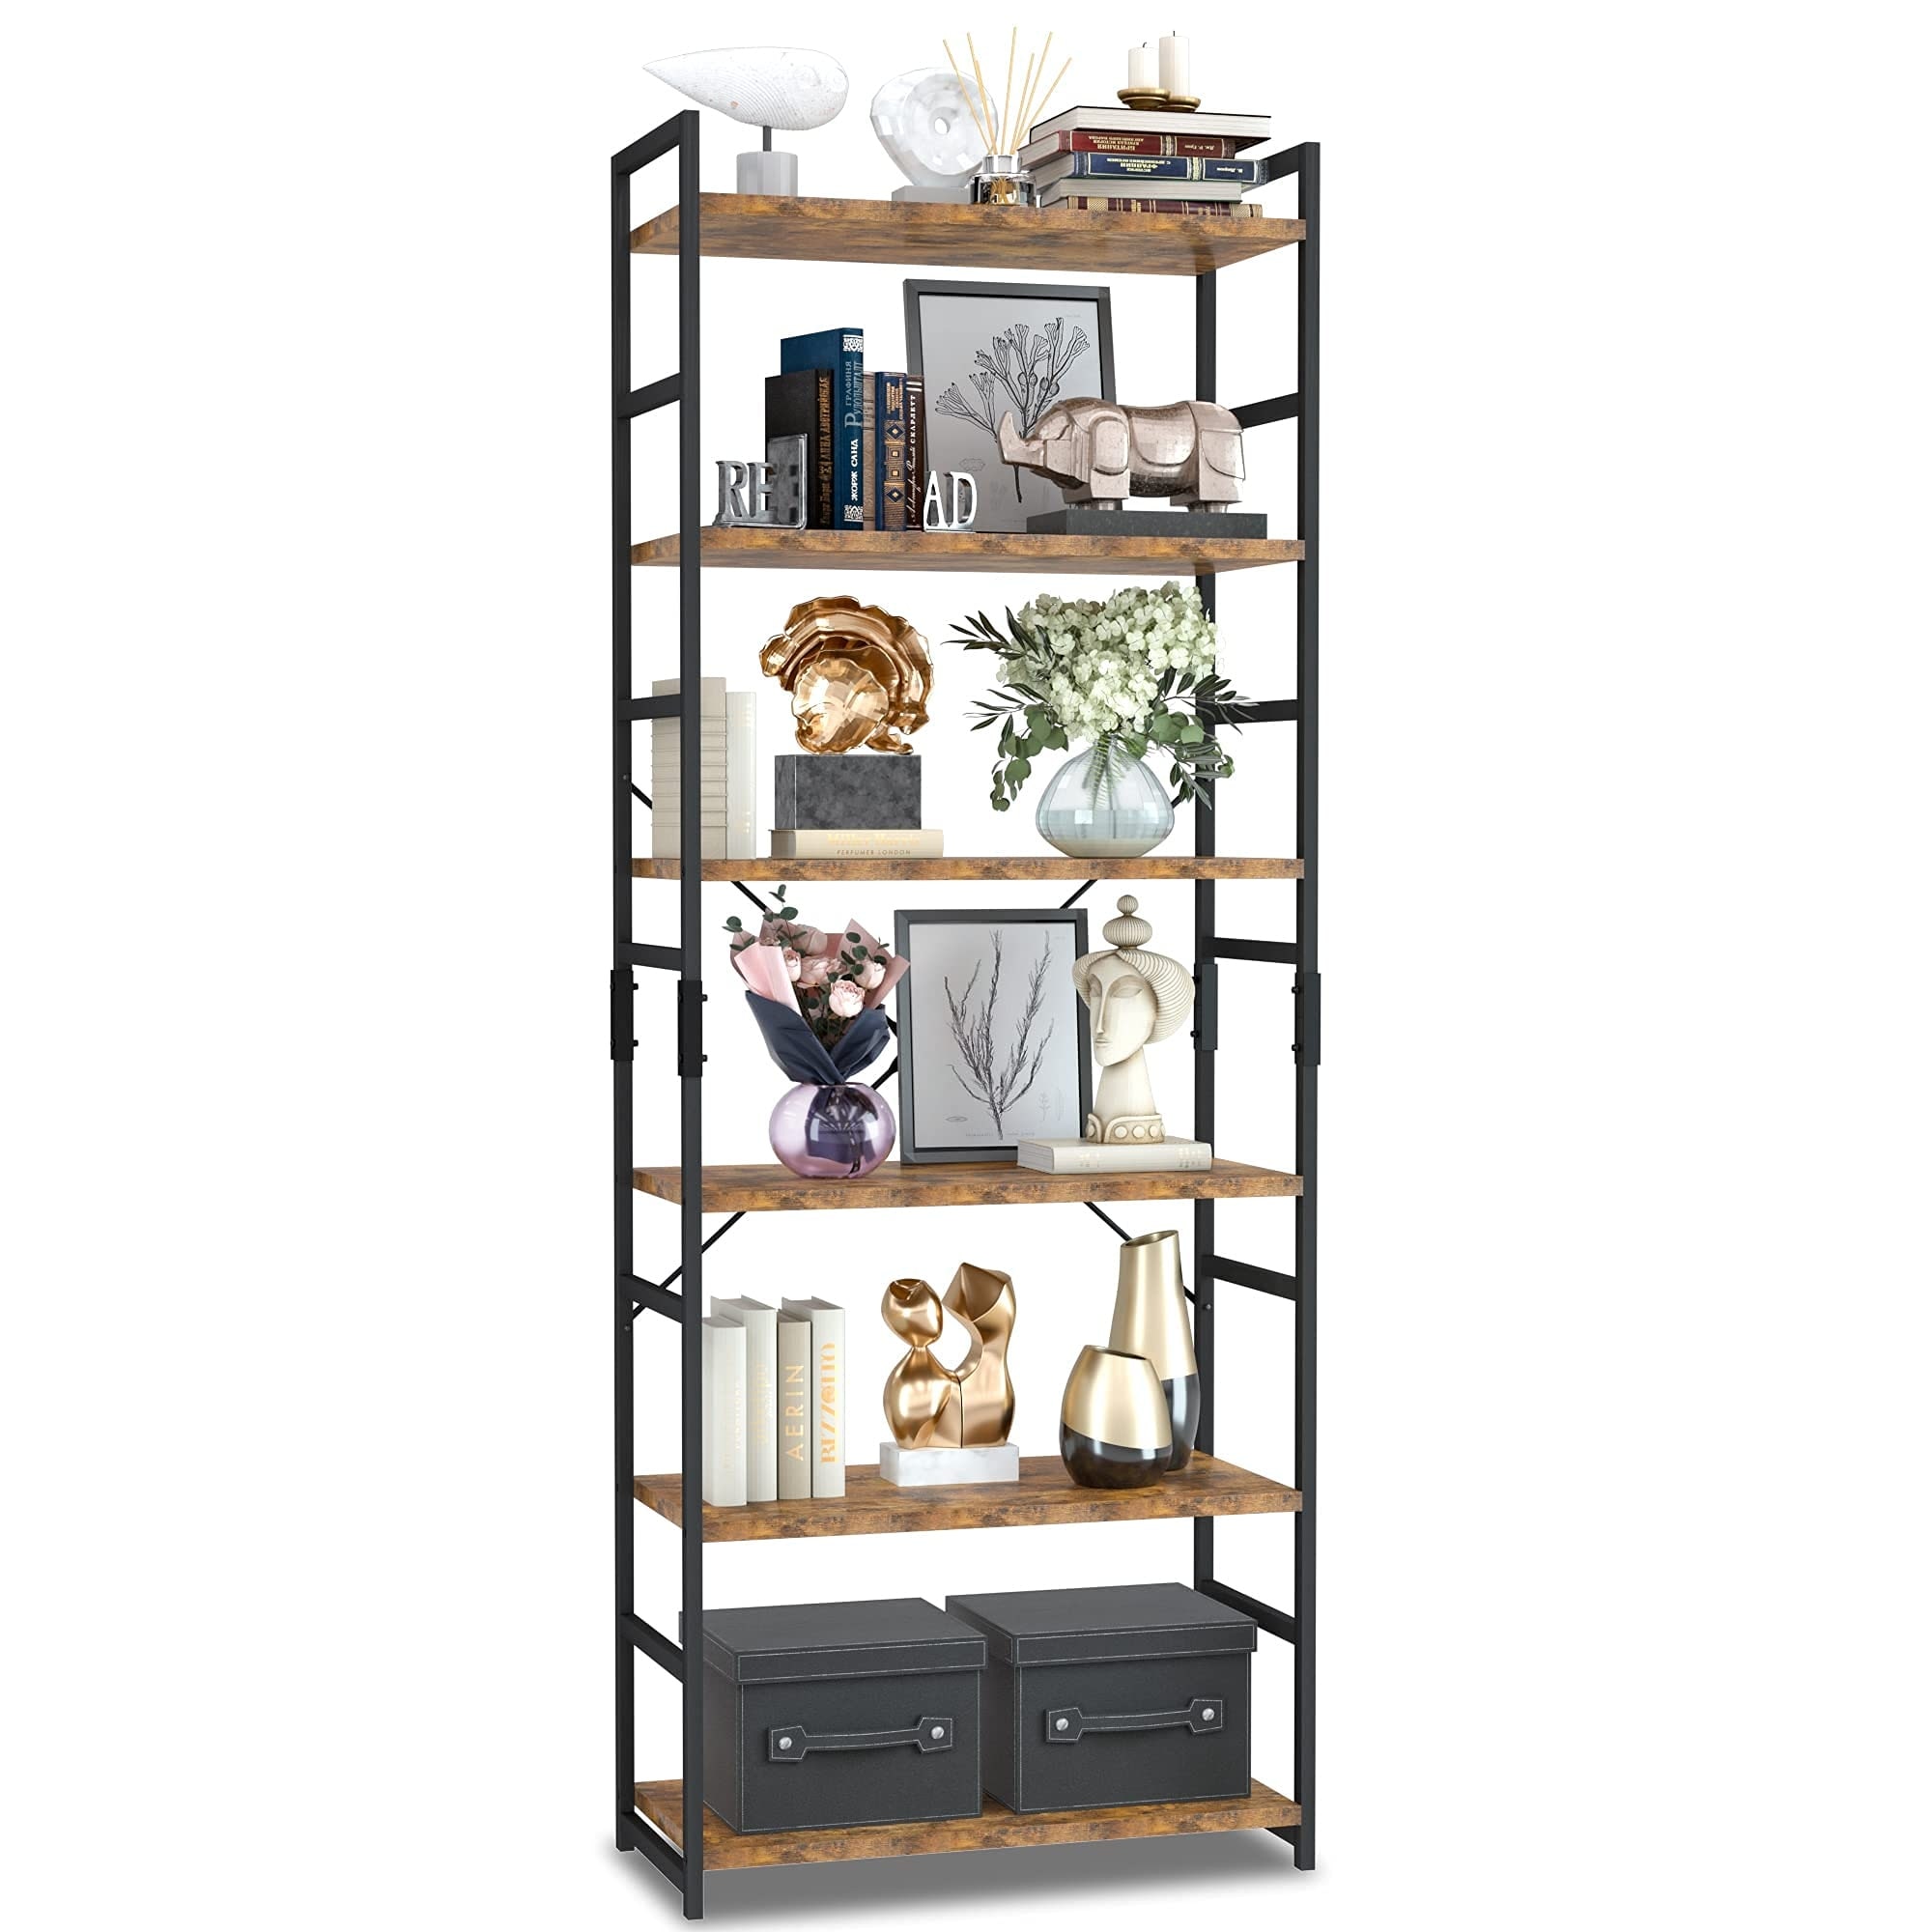 https://ak1.ostkcdn.com/images/products/is/images/direct/0a8daf07f4513a4d2eff6913b44f2ecc6a348901/6-Tier-Bookshelf%2C-Tall-Bookcase-Shelf-Storage-Organizer%2C-Modern-Book-Shelf-for-Bedroom%2C-Living-Room-and-Home-Office%2C-Vintage.jpg